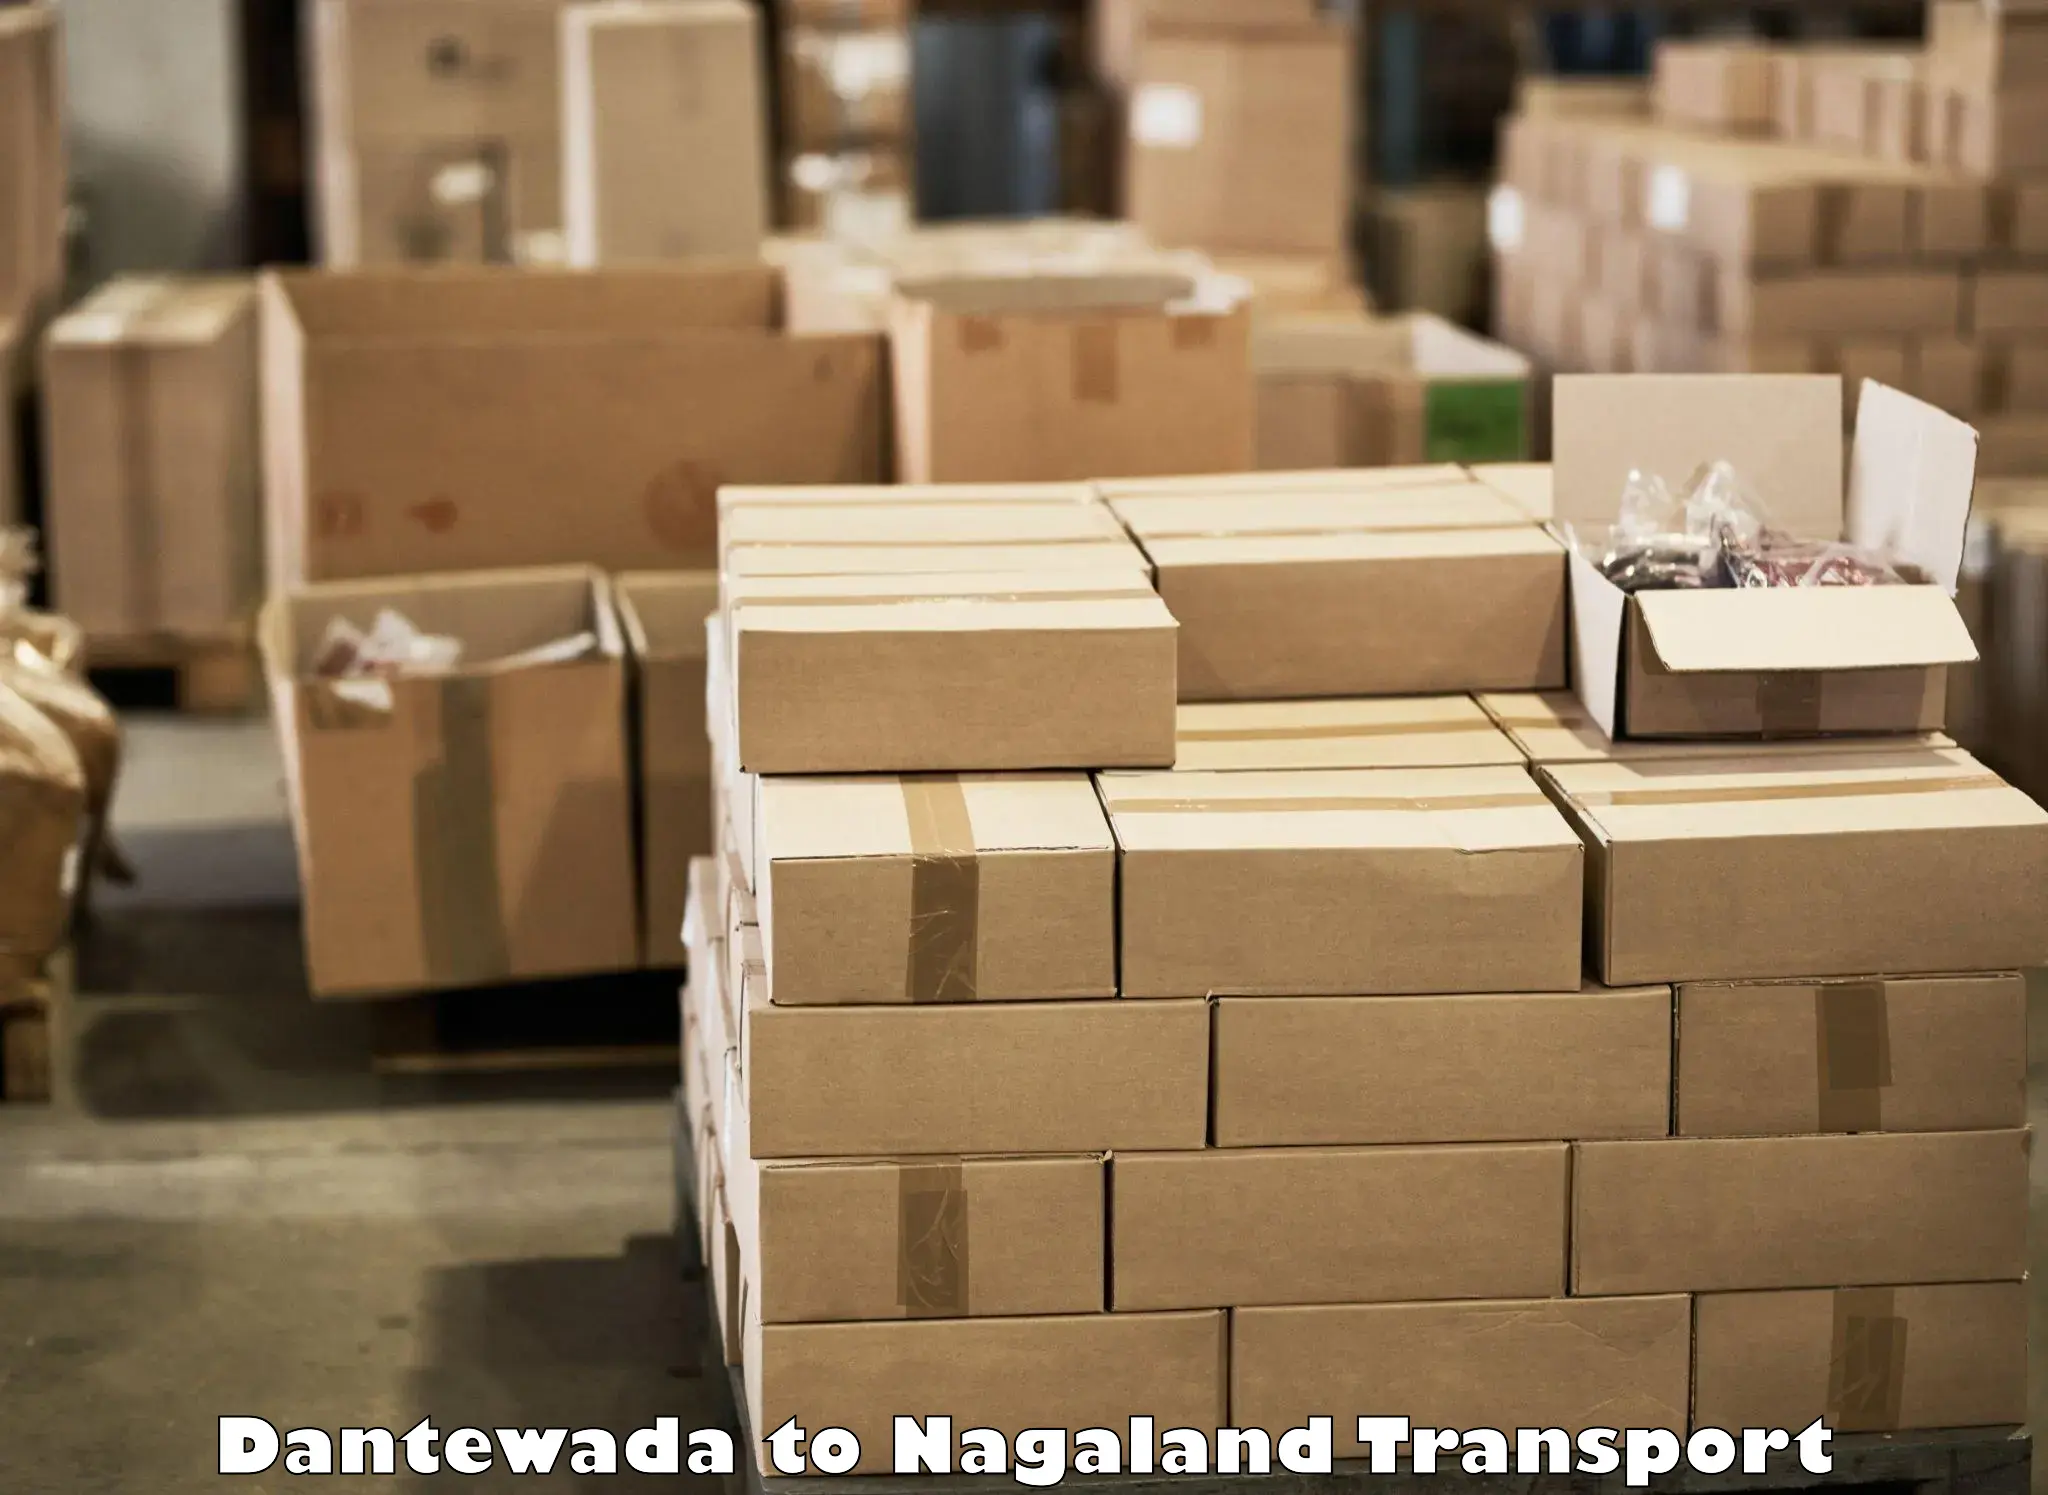 Transport bike from one state to another Dantewada to Nagaland